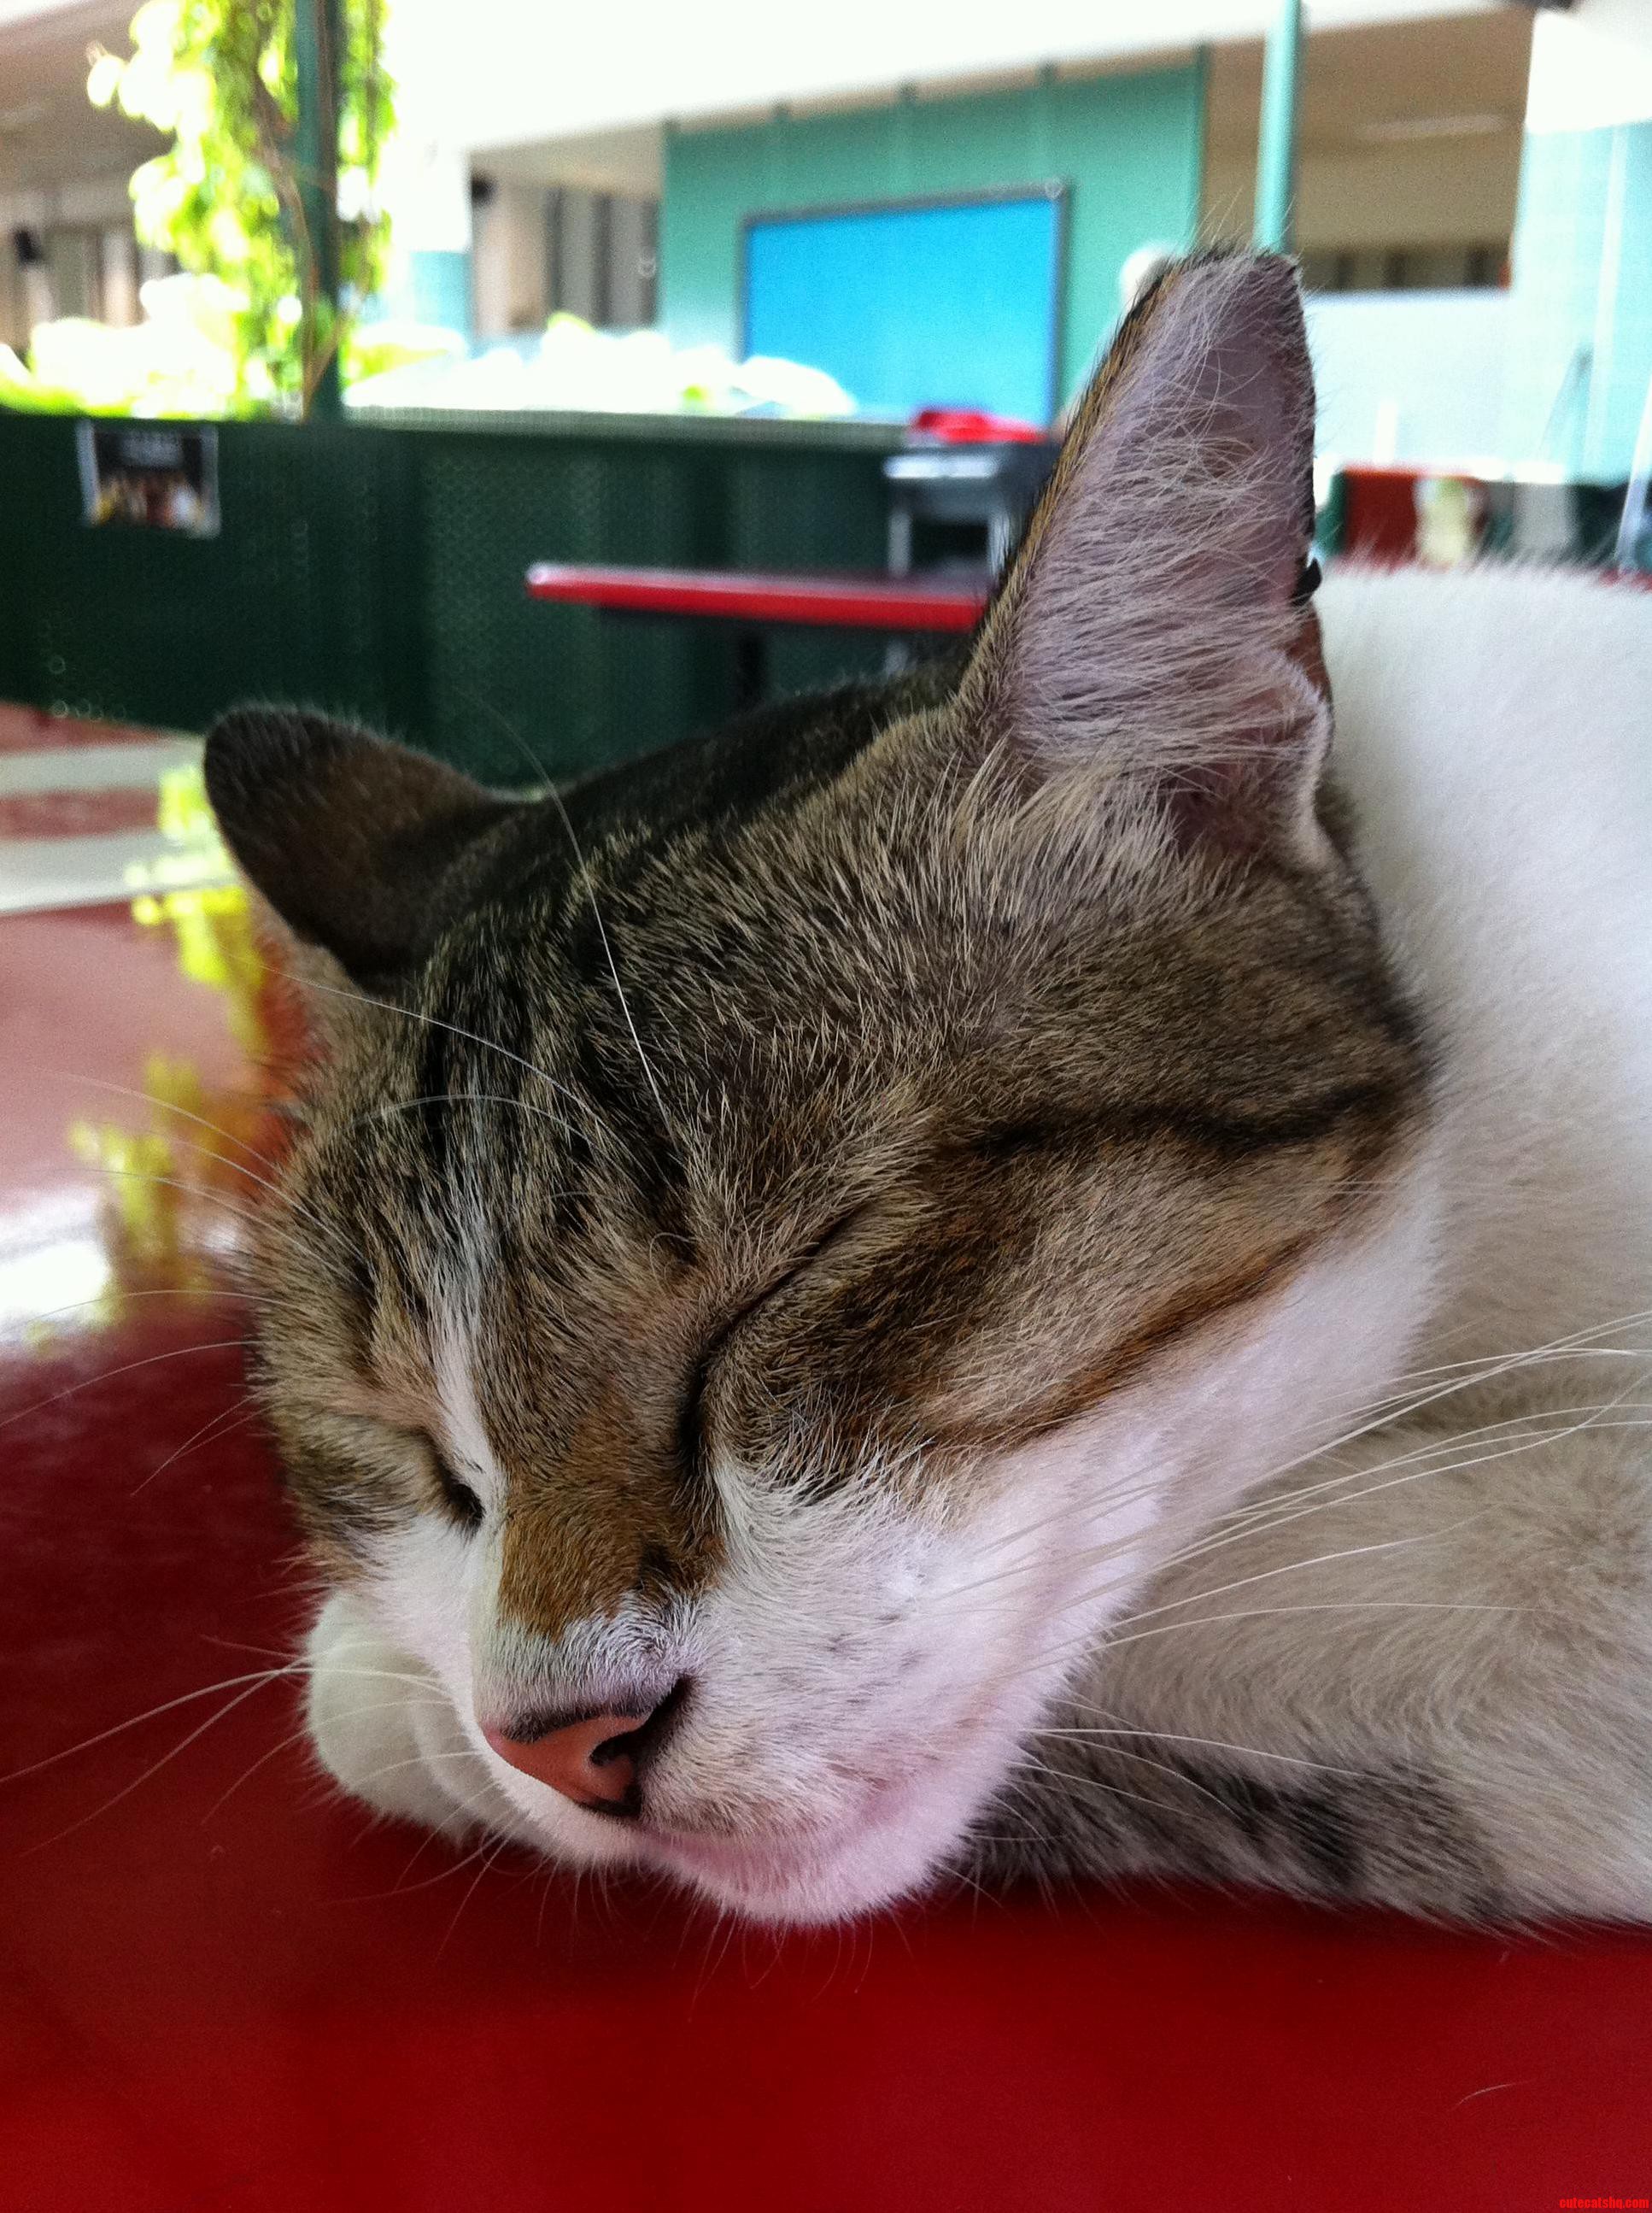 The School Cat At My Junior College – She Jumped Onto My Notes On Time And Made Studying Impossible